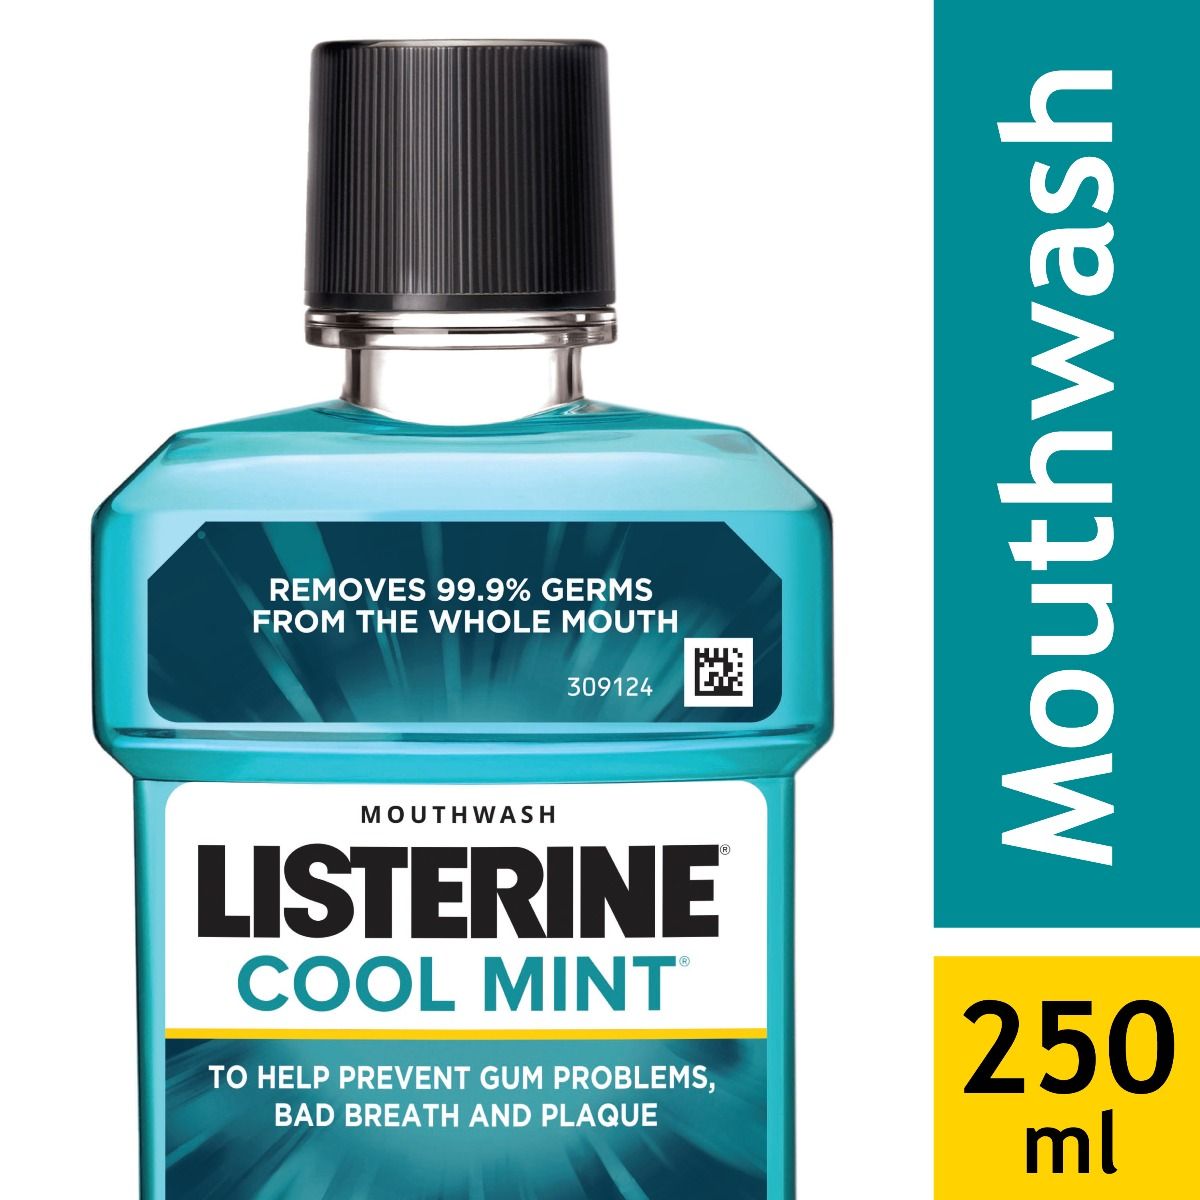 Listerine Cool Mint Mouthwash, 250 ml, Pack of 1 